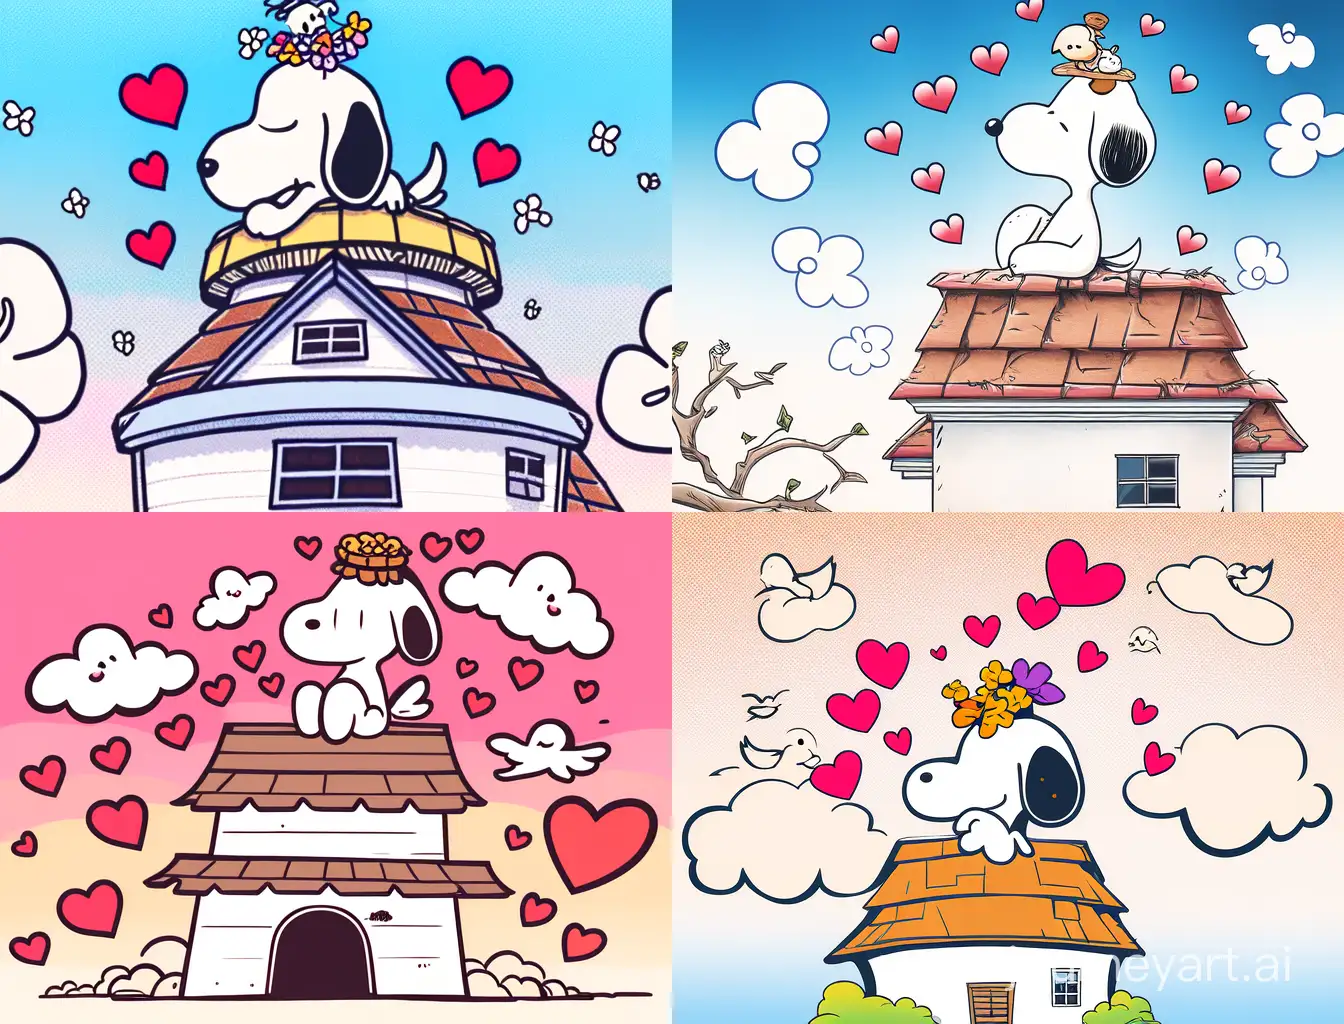 Snoopy siting on top of his house with Woodstock on his head surrounded by outline hearts